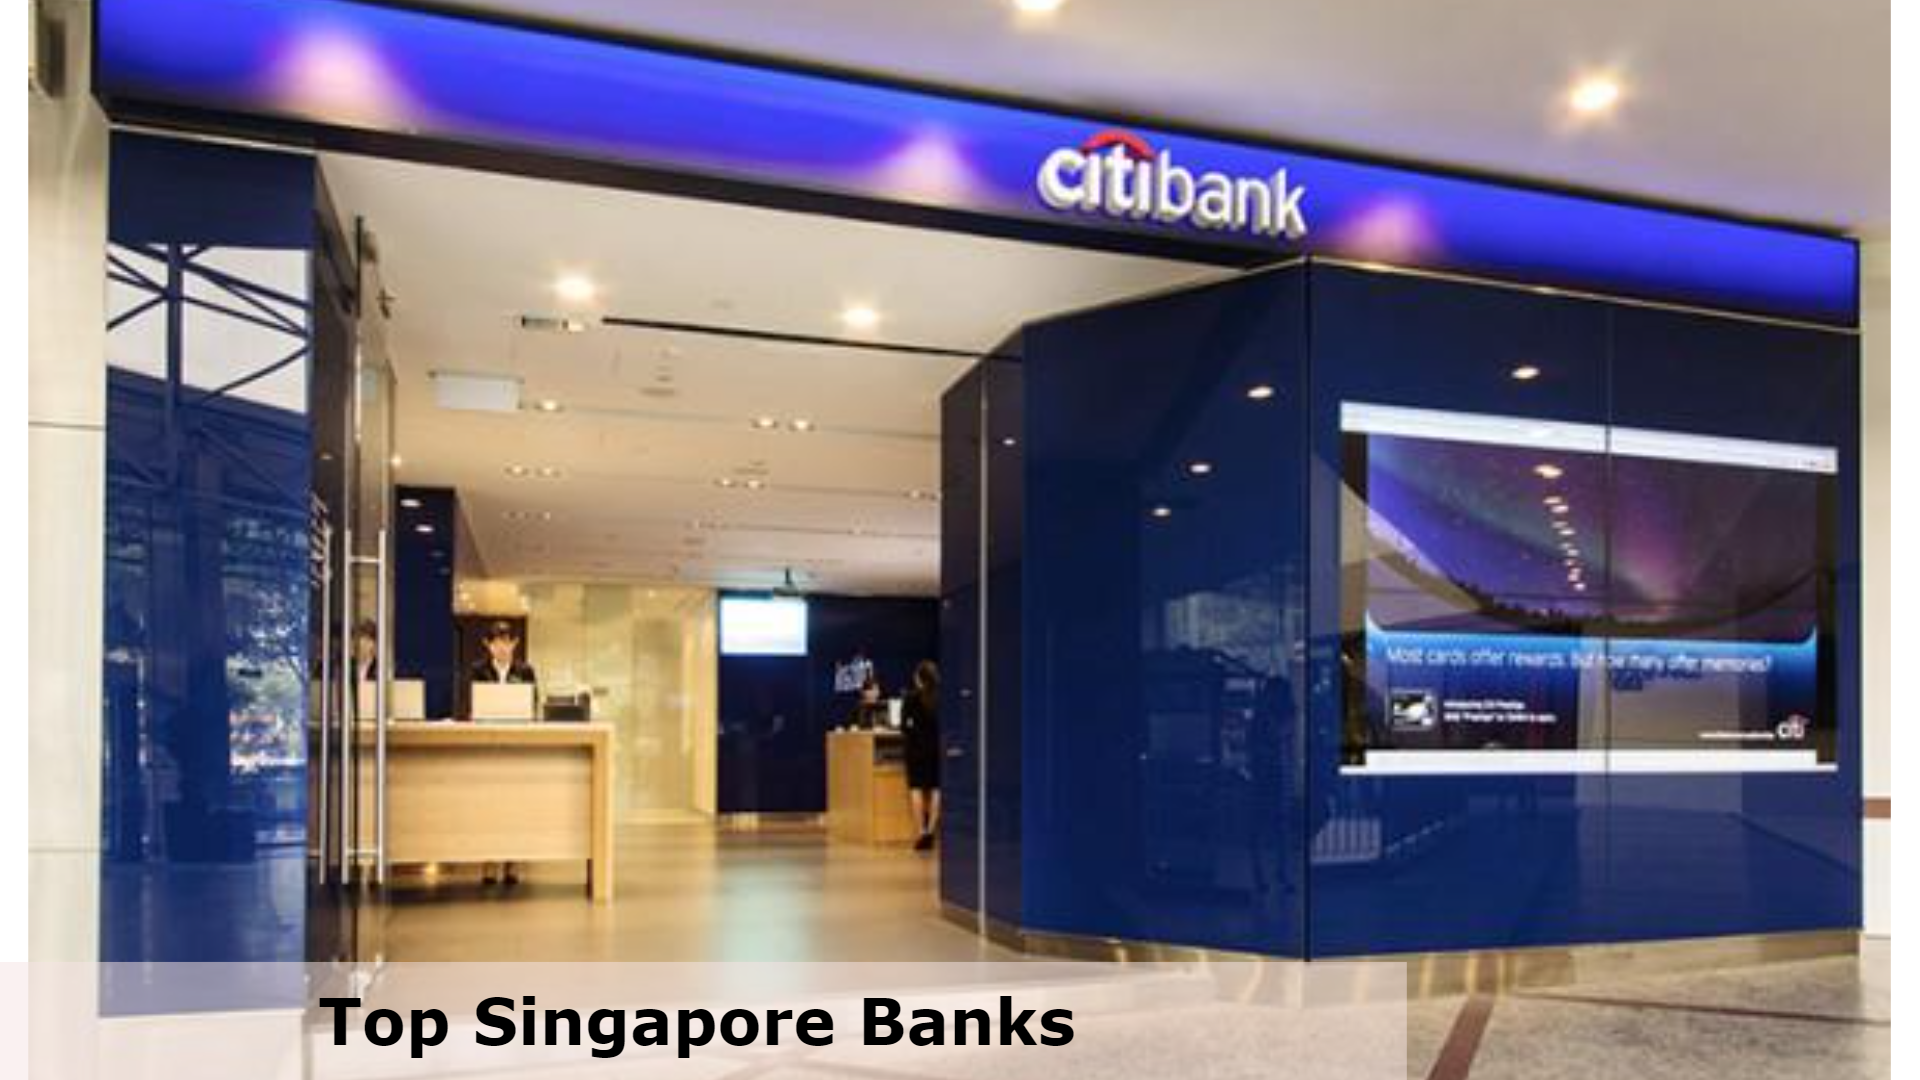 Which Singapore Bank is the Best, What is the number 1 bank in Singapore?, Which is the Safest Bank in Singapore?, What is the strongest bank in Singapore?, Which bank is best for foreigners in Singapore?, top 5 banks in singapore, list of banks in singapore (mas), list of banks in singapore, 
foreign banks in singapore, list of private banks in singapore, private banks in singapore, top banks in singapore, local banks in singapore, What is the number 1 bank in Singapore?, What is the strongest bank in Singapore?, What are the top 5 major banks?, Which bank is safest in Singapore?, 